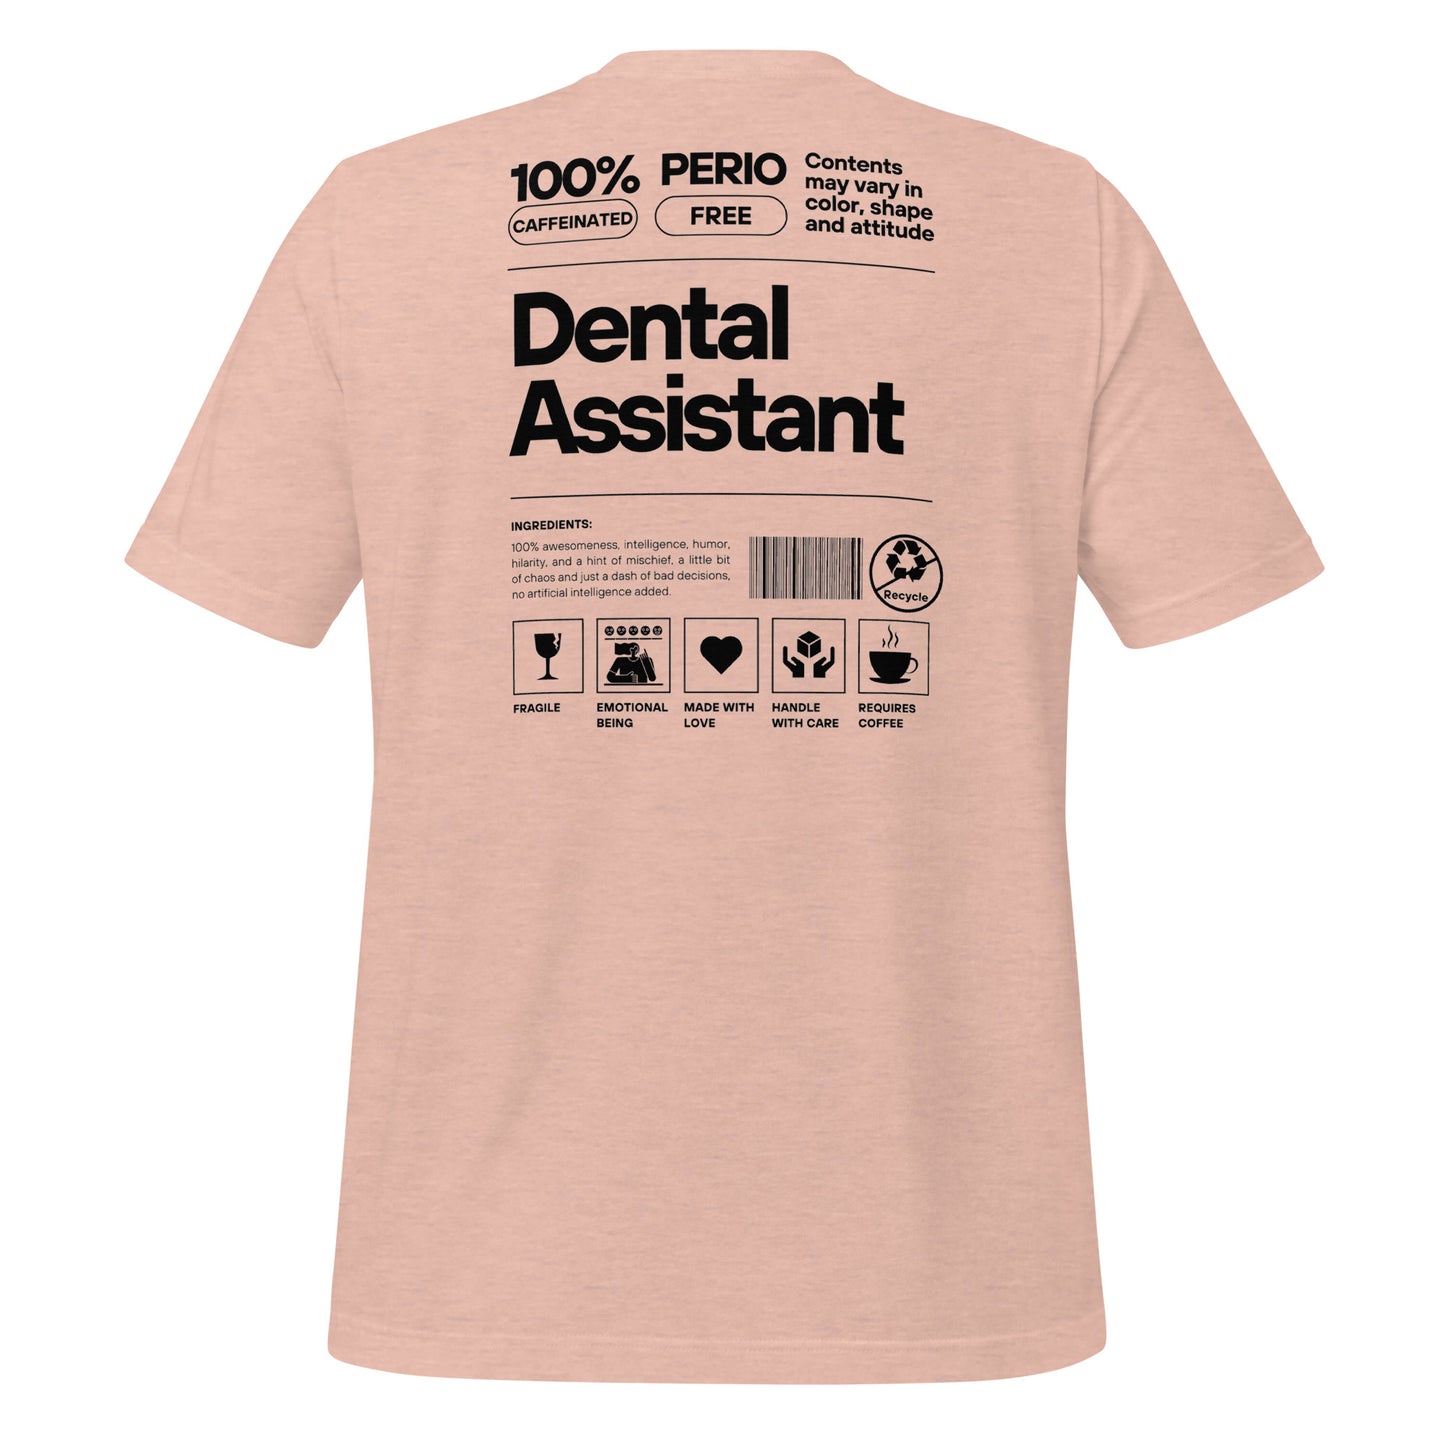 Heather prism peach dental assistant shirt featuring a creative label design with icons and text, perfect for dental assistants who want to express their identity and passion for their job - dental shirts back view.